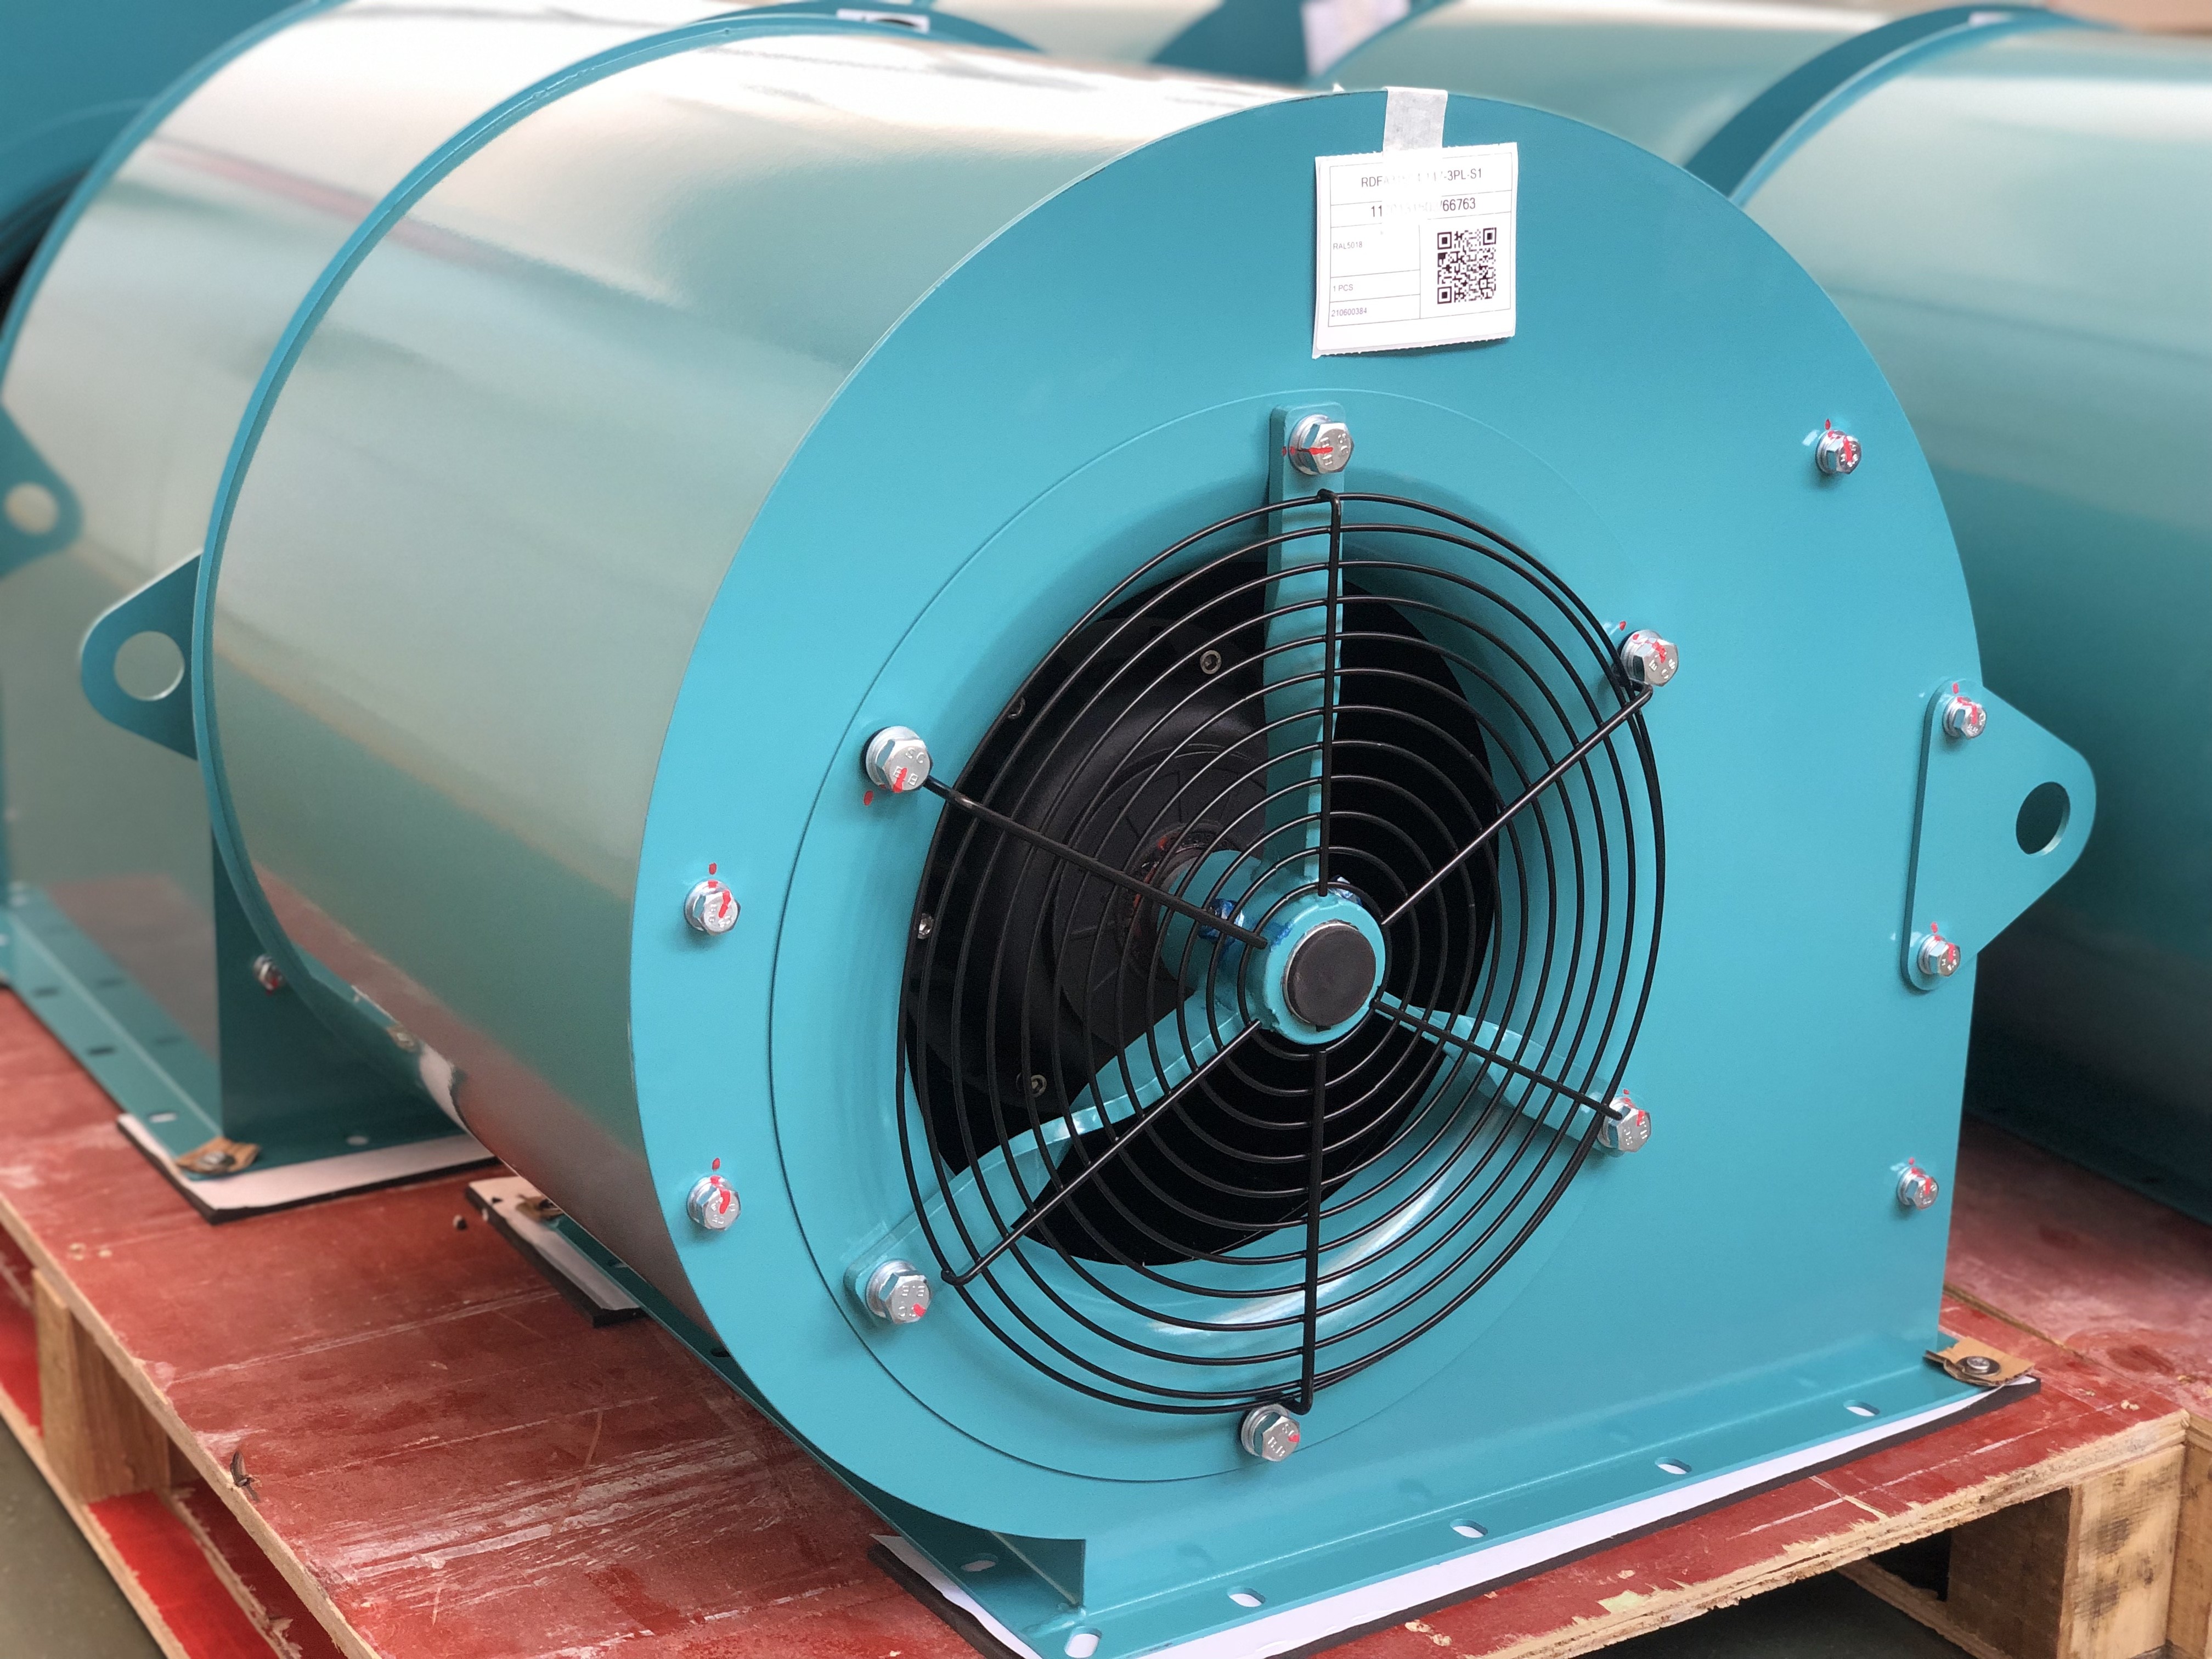  Single Phase 4 Pole Double Inlet Centrifugal  Fan 10 Inch Blade Converter Cooling Manufactures